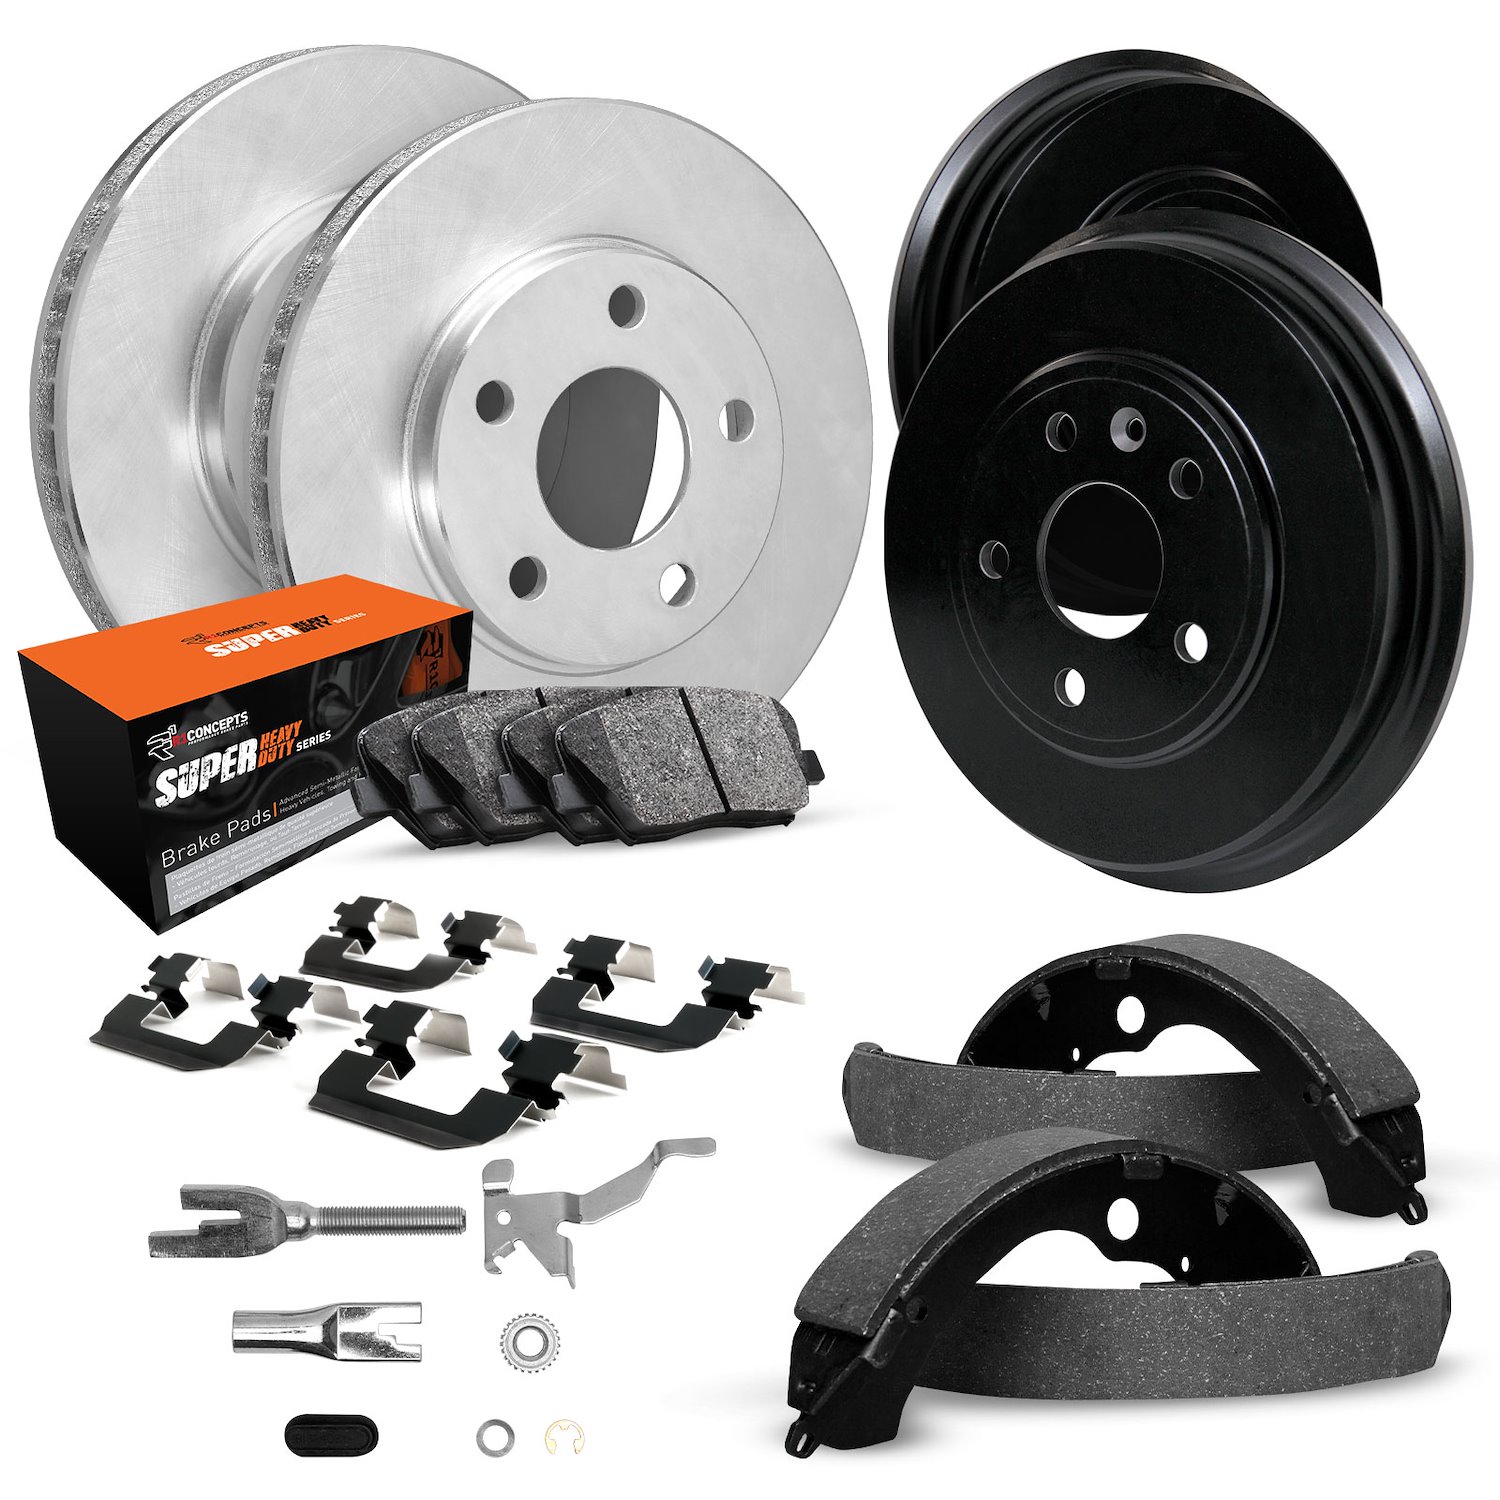 E-Line Blank Brake Rotor & Drum Set w/Super-Duty Pads, Shoes, Hardware, & Adjusters, 1979-1980 GM, Position: Front & Rear